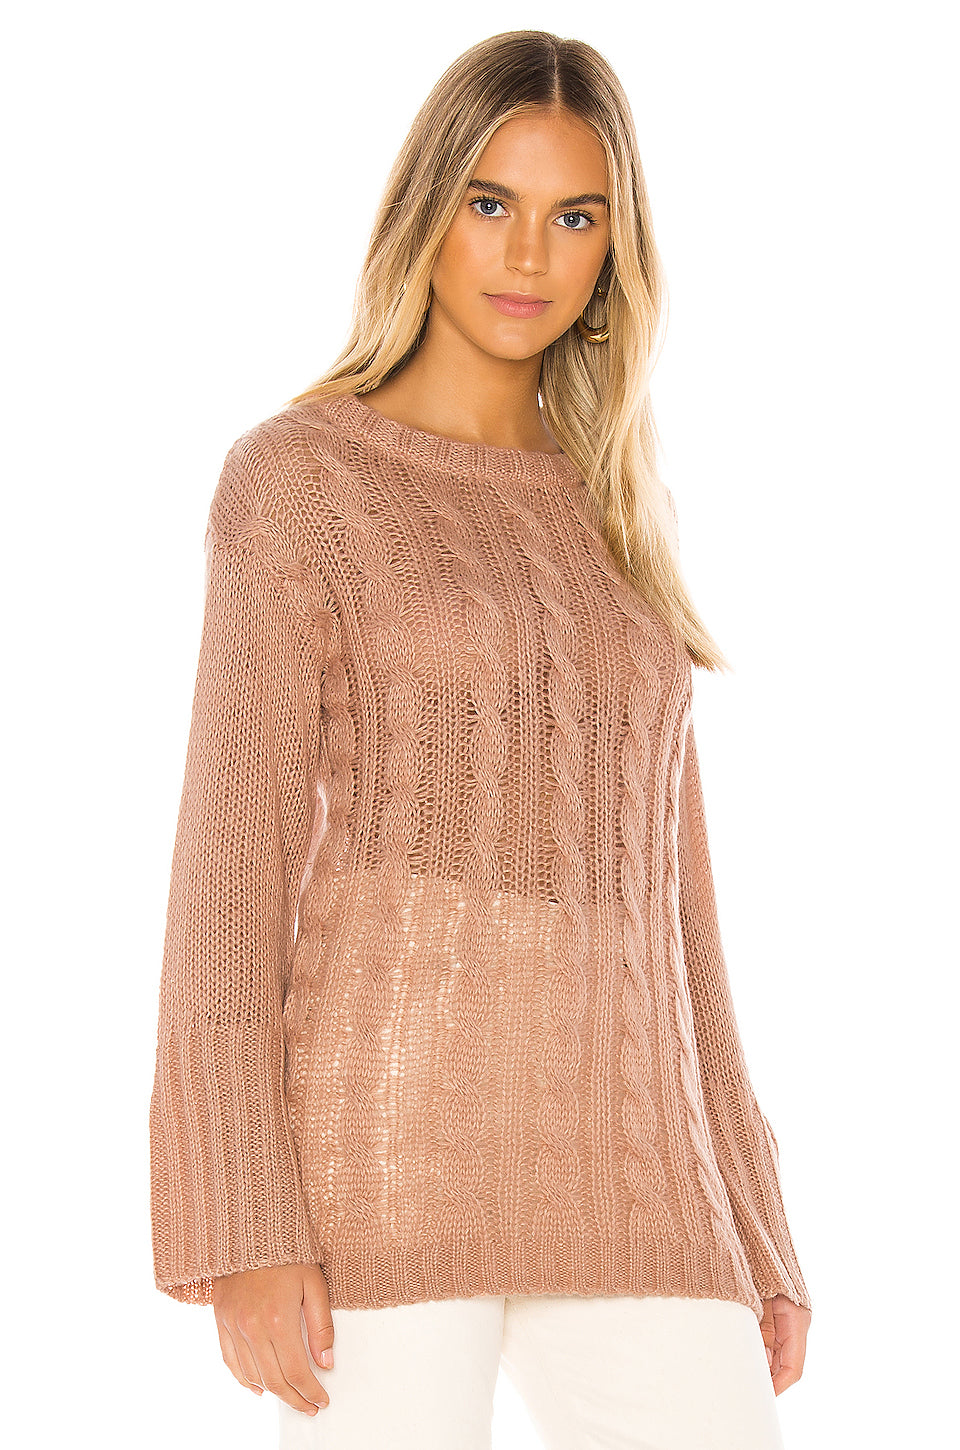 Barbados Sweater in PINK